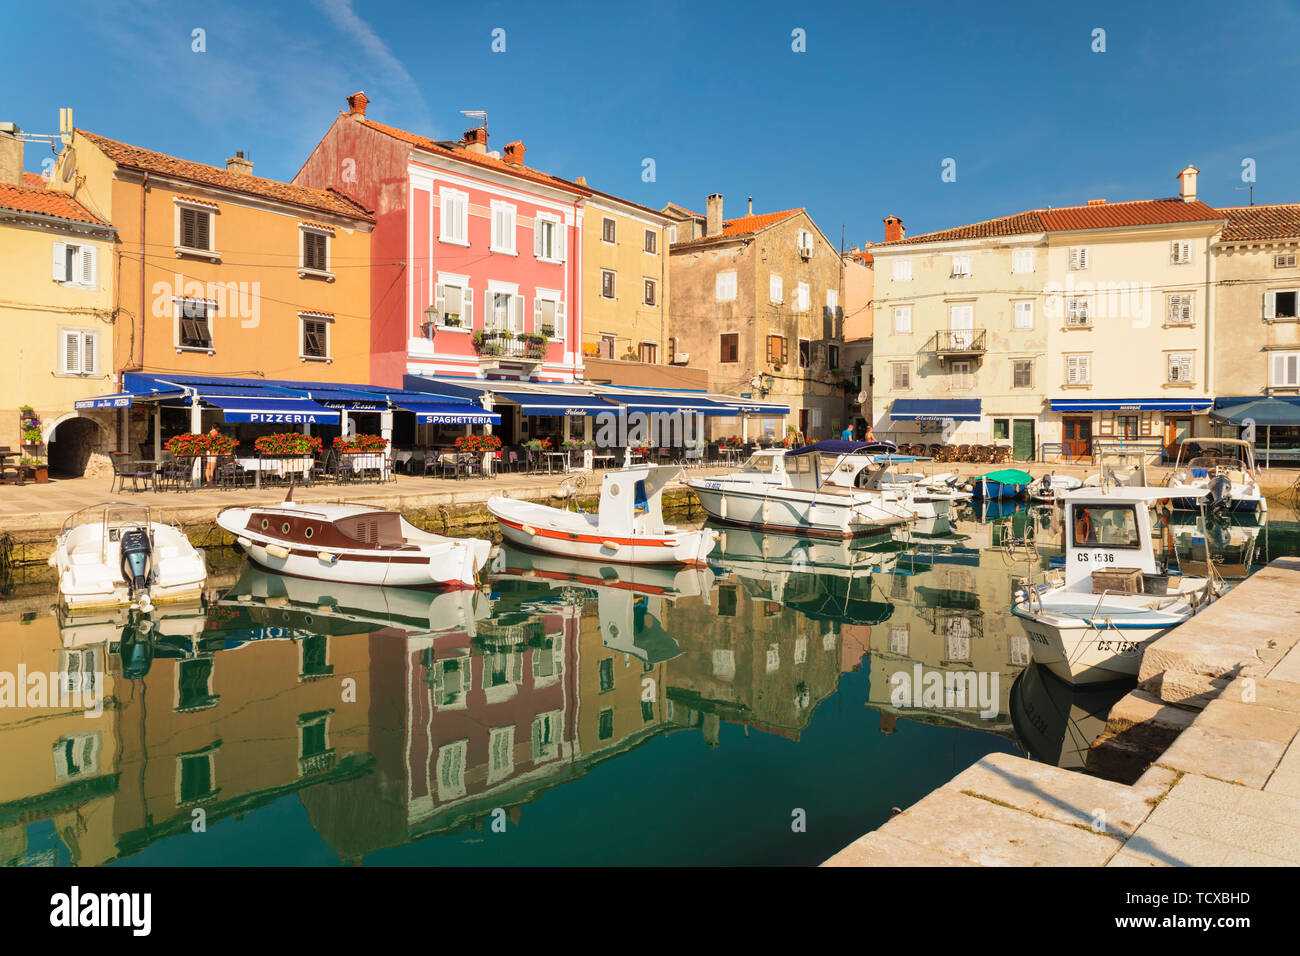 Restaurants at the harbour, Cres Town, Cres Island, Kvarner Gulf, Croatia, Europe Stock Photo